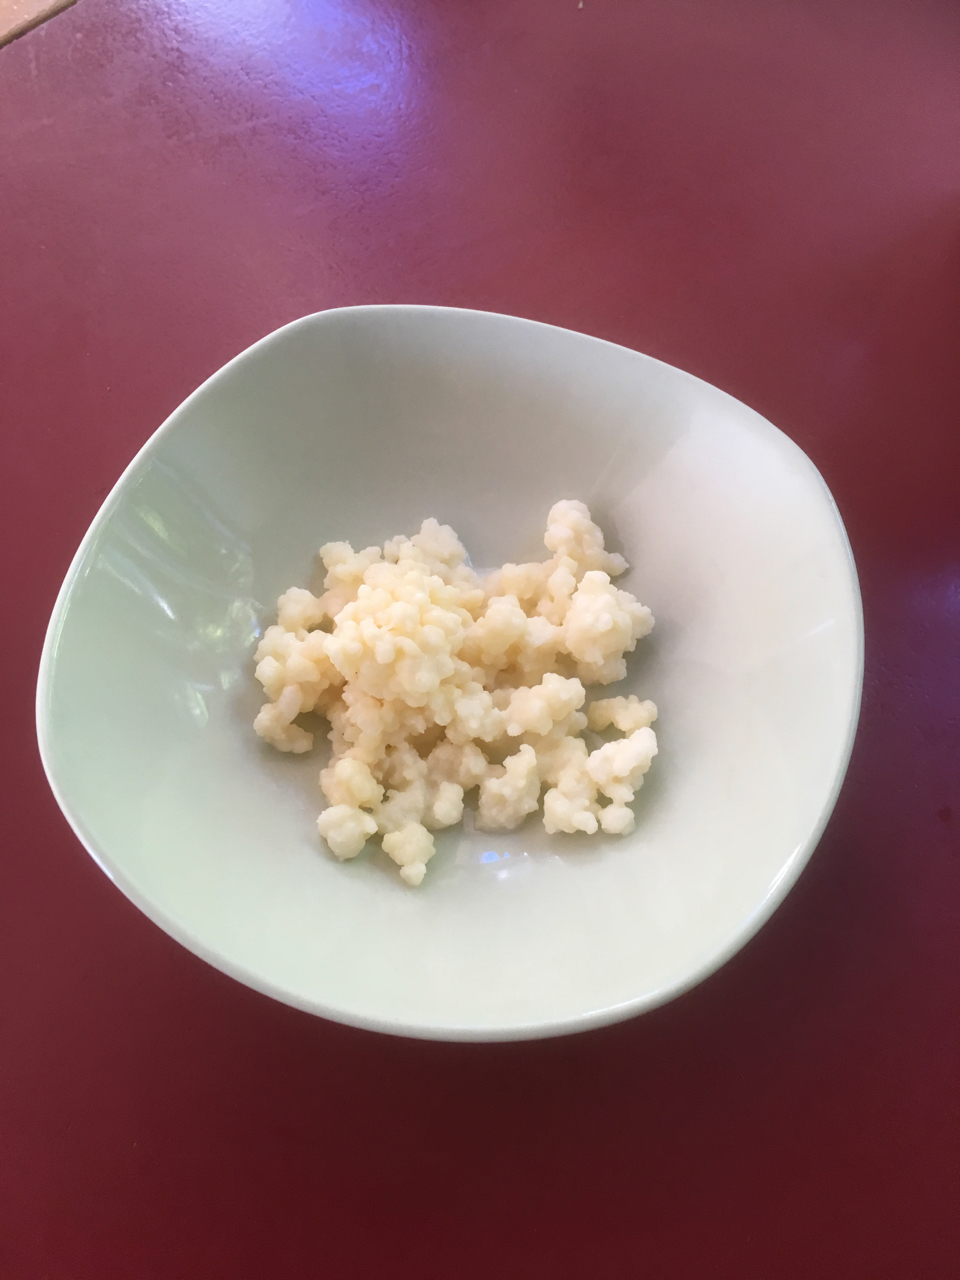 Kefir grains sitting in a pale green ceramic bowl on deep red benchtop.